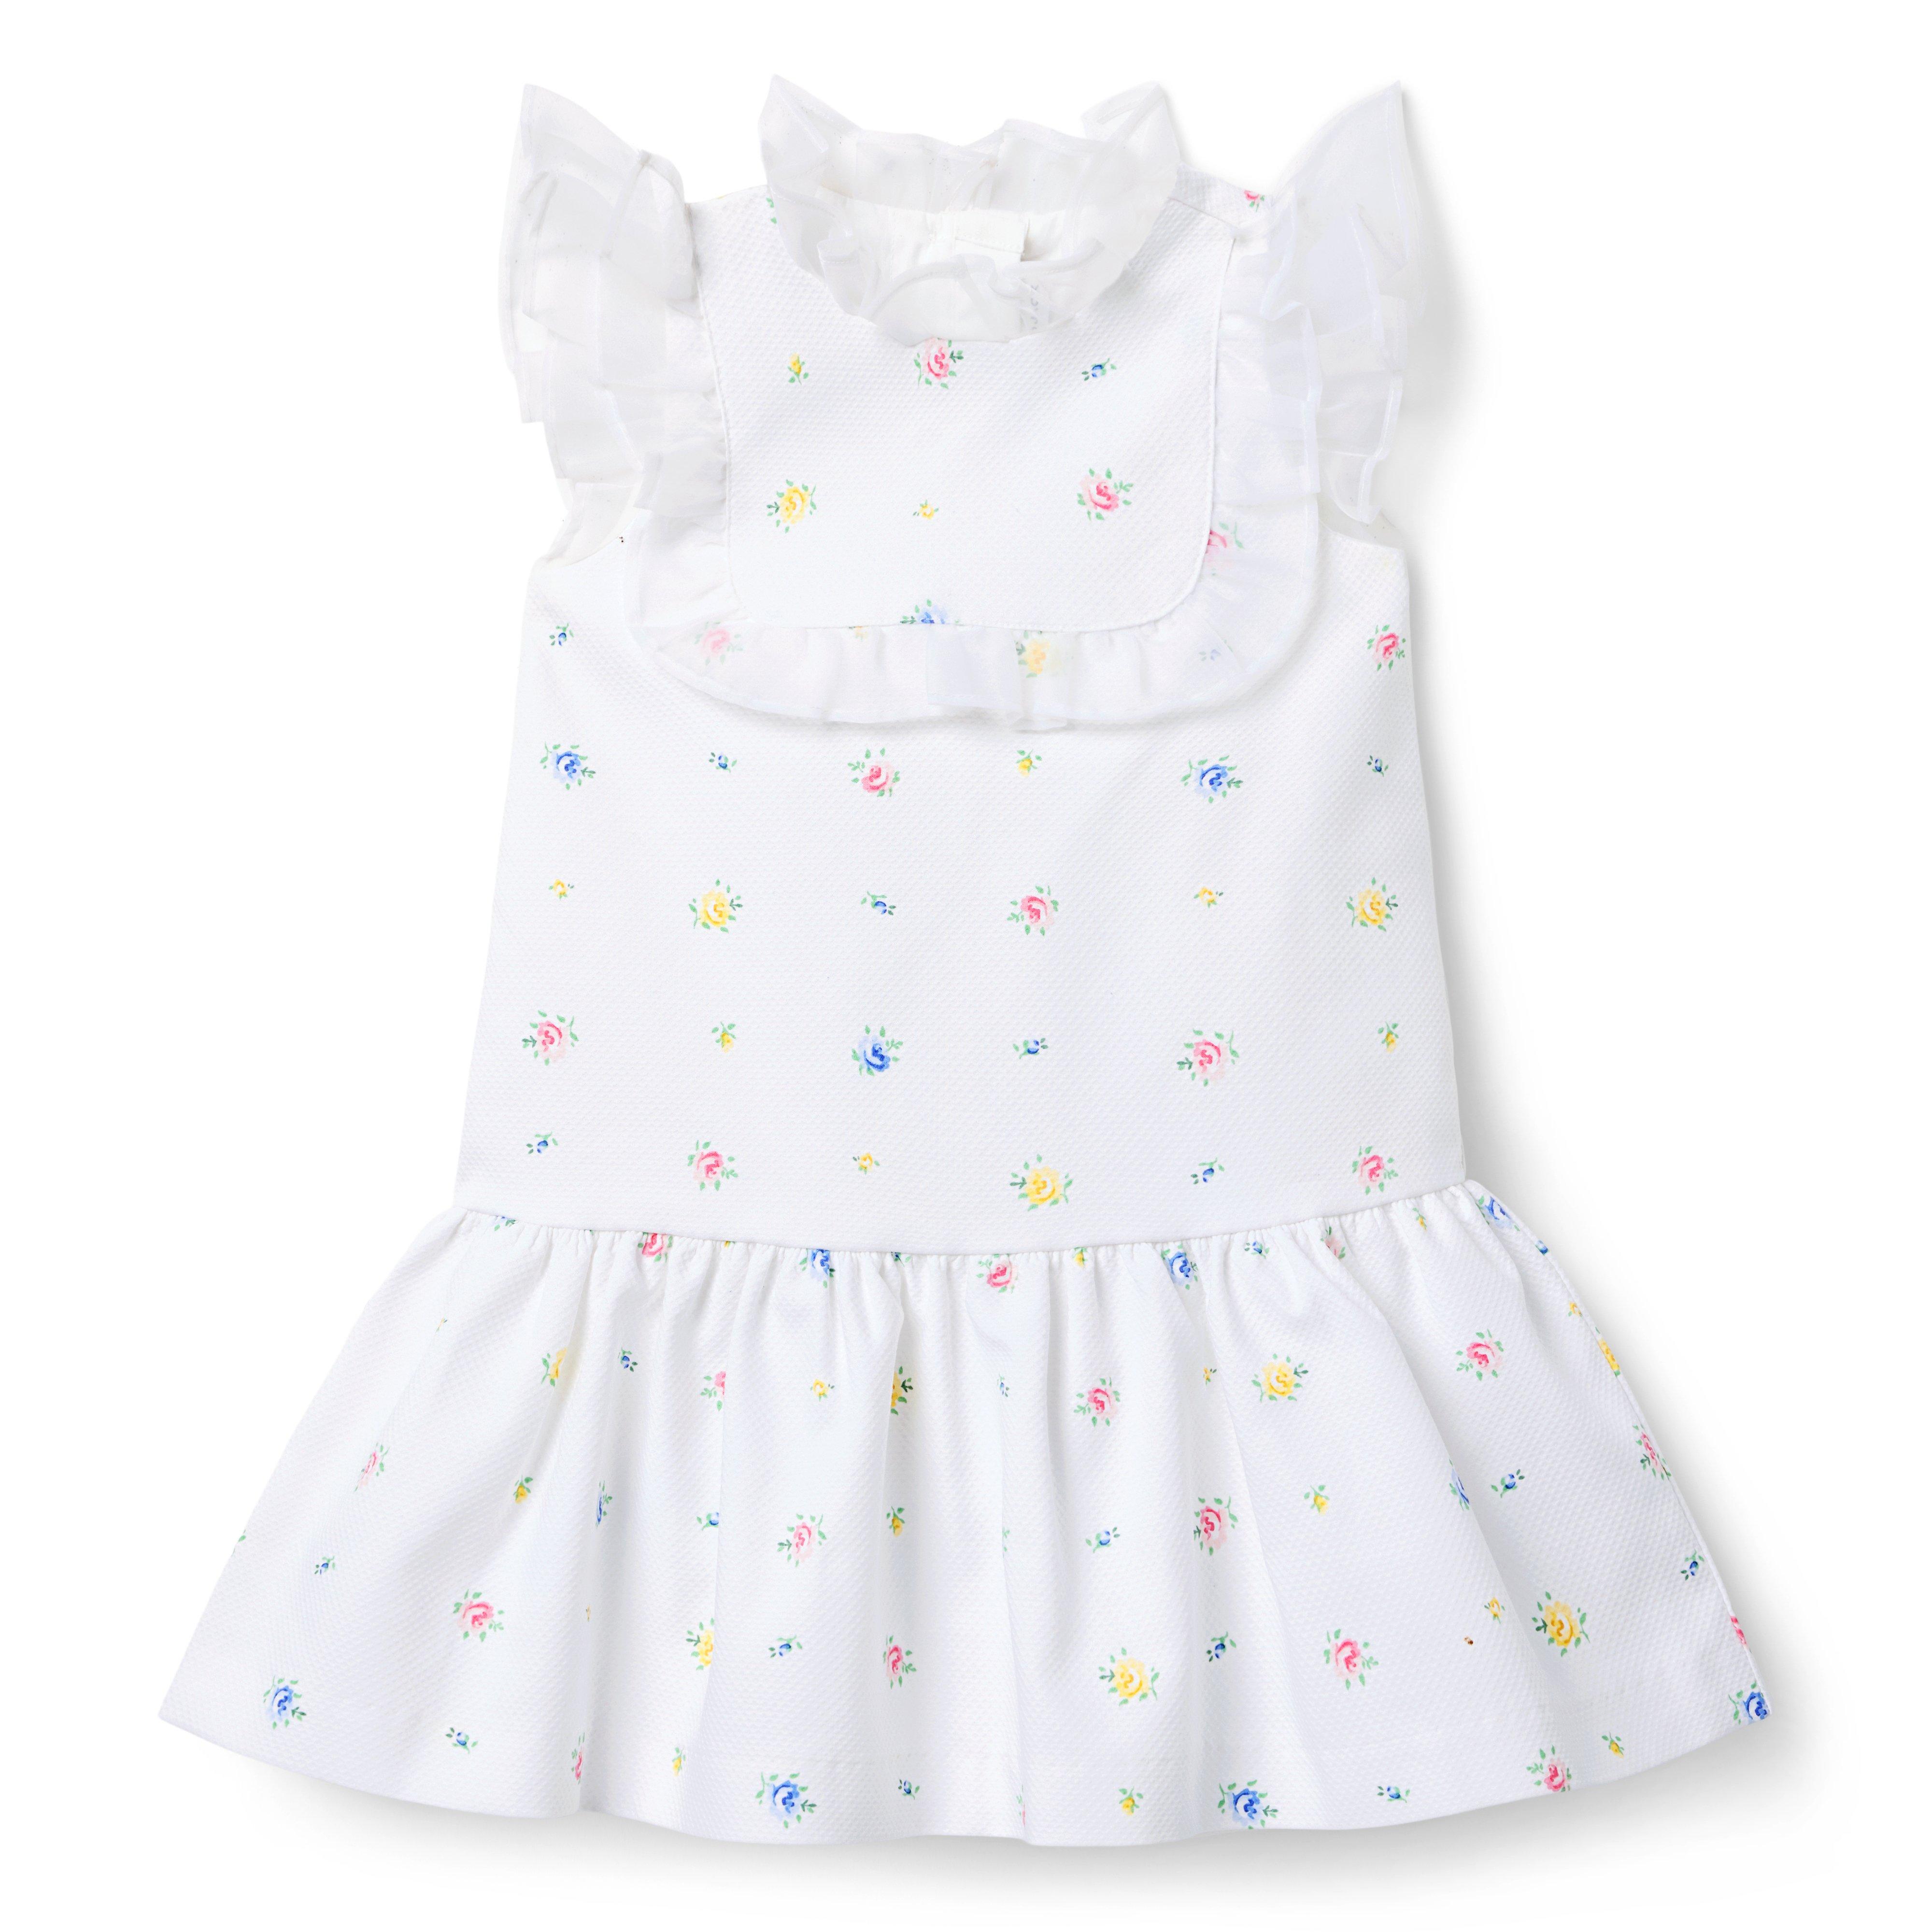 Shop all sale products from Janie and Jack for girl, boy, newborn